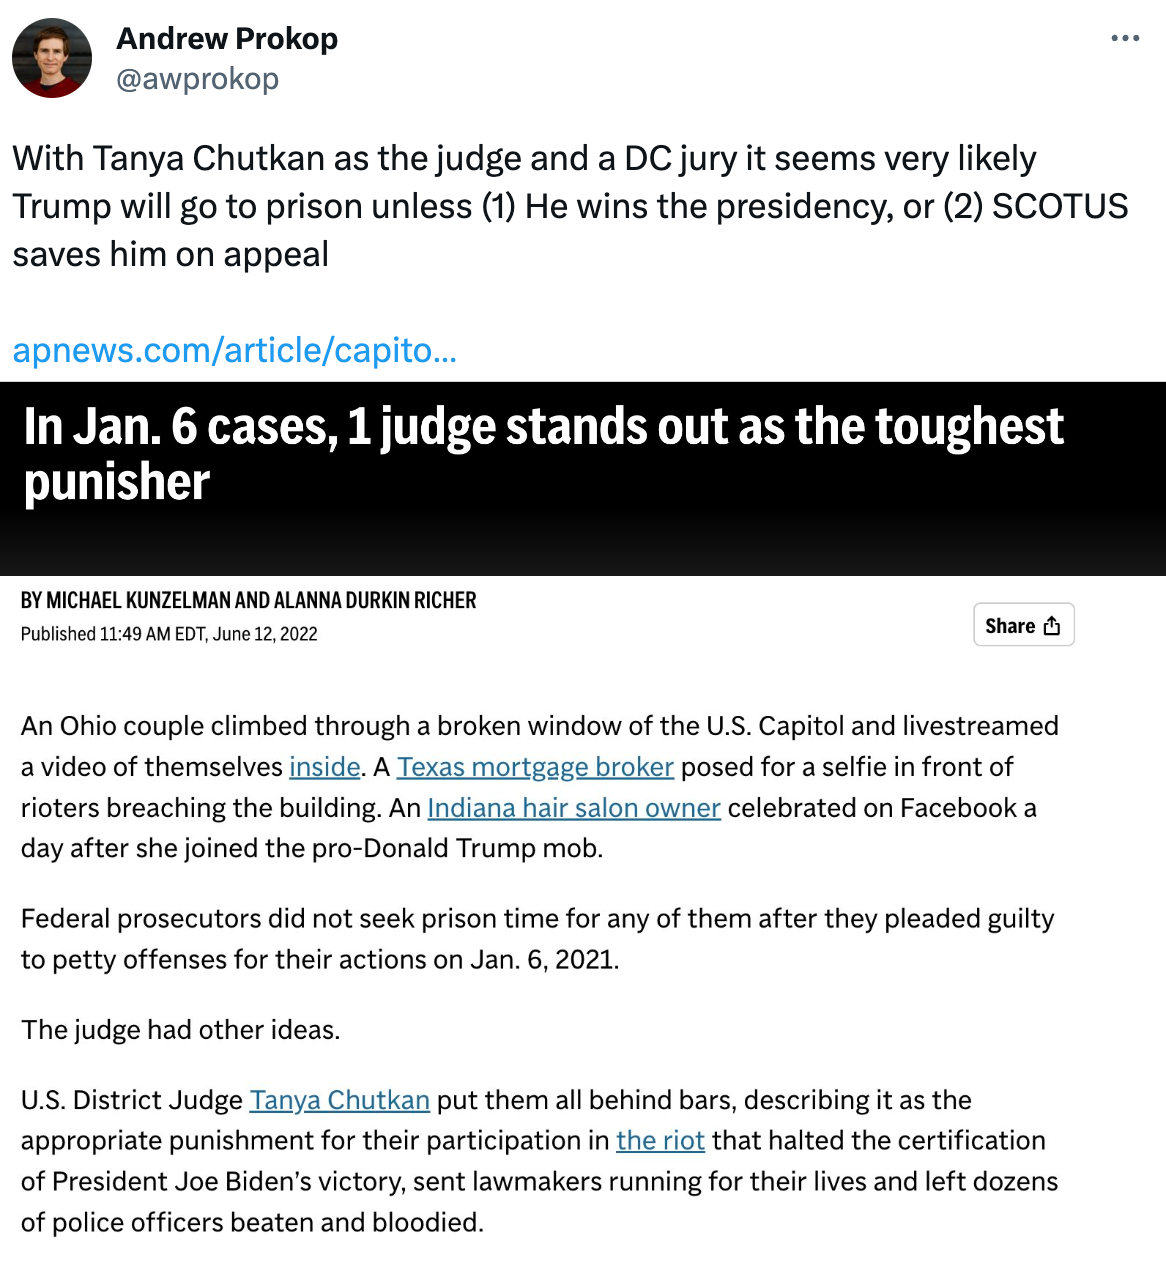  Andrew Prokop @awprokop With Tanya Chutkan as the judge and a DC jury it seems very likely Trump will go to prison unless (1) He wins the presidency, or (2) SCOTUS saves him on appeal  https://apnews.com/article/capitol-siege-only-on-ap-donald-trump-government-and-politics-sentencing-de394dd56b3251aac5a50014f4d6afa7